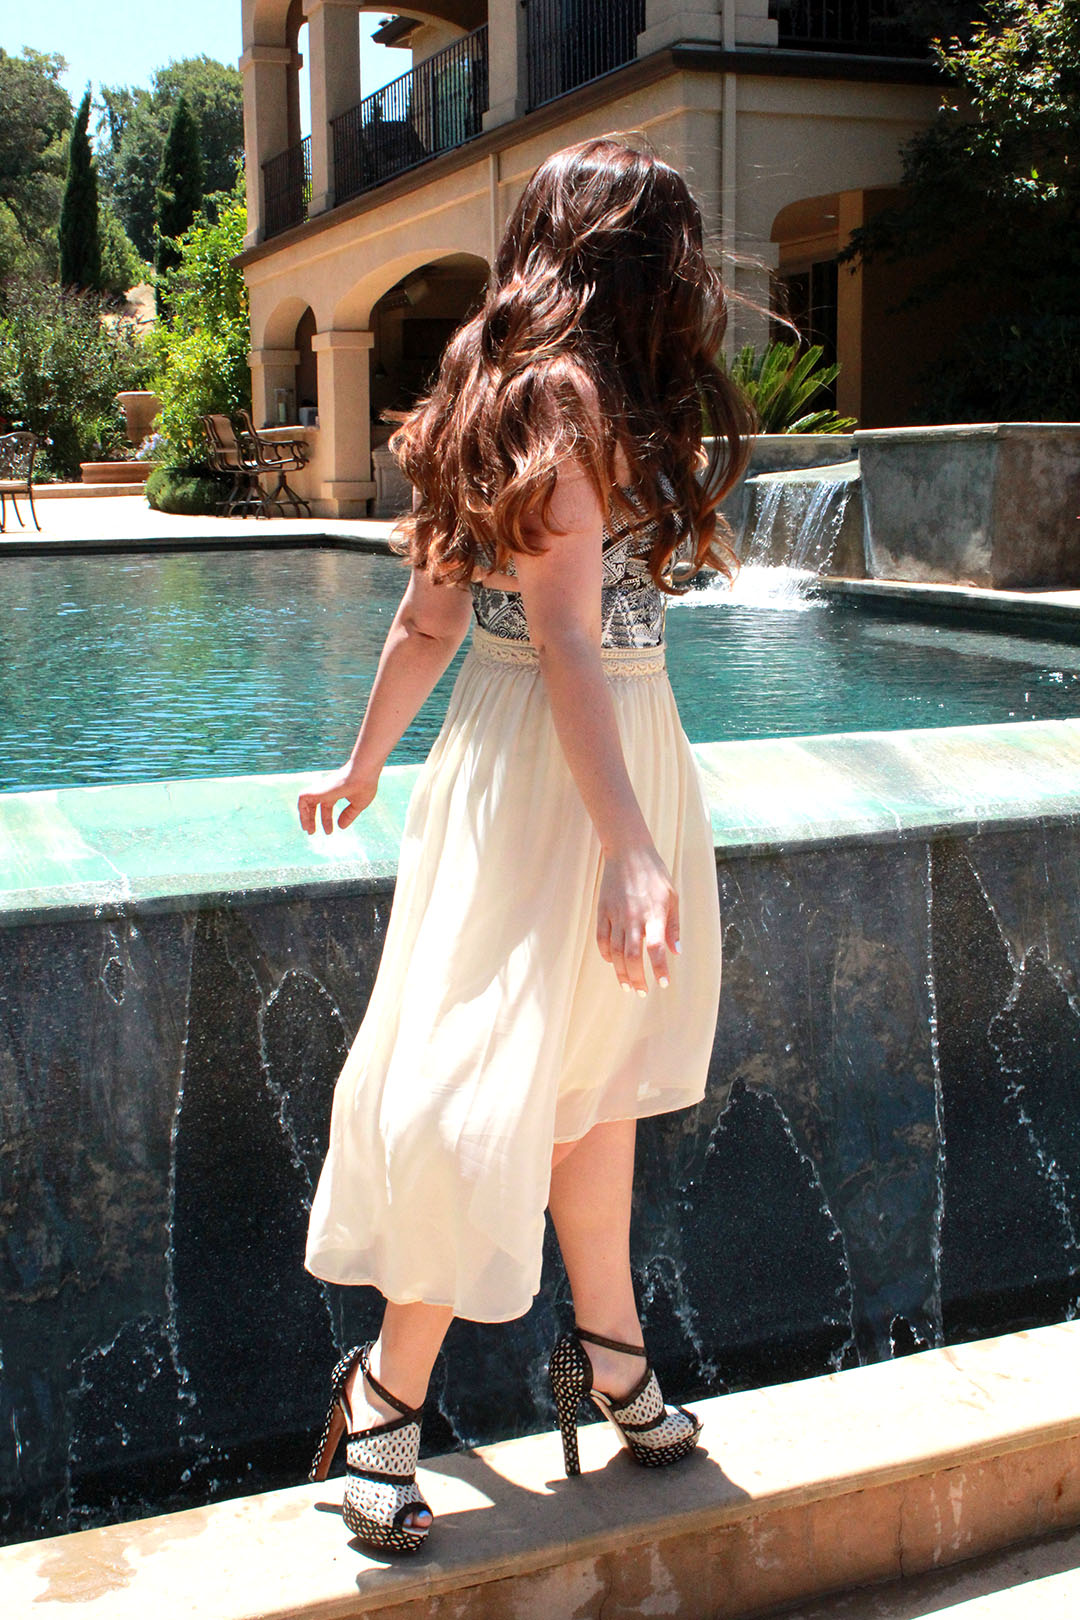 Alaia pool party heels featured by top San Francisco fashion blogger, Just Add Glam